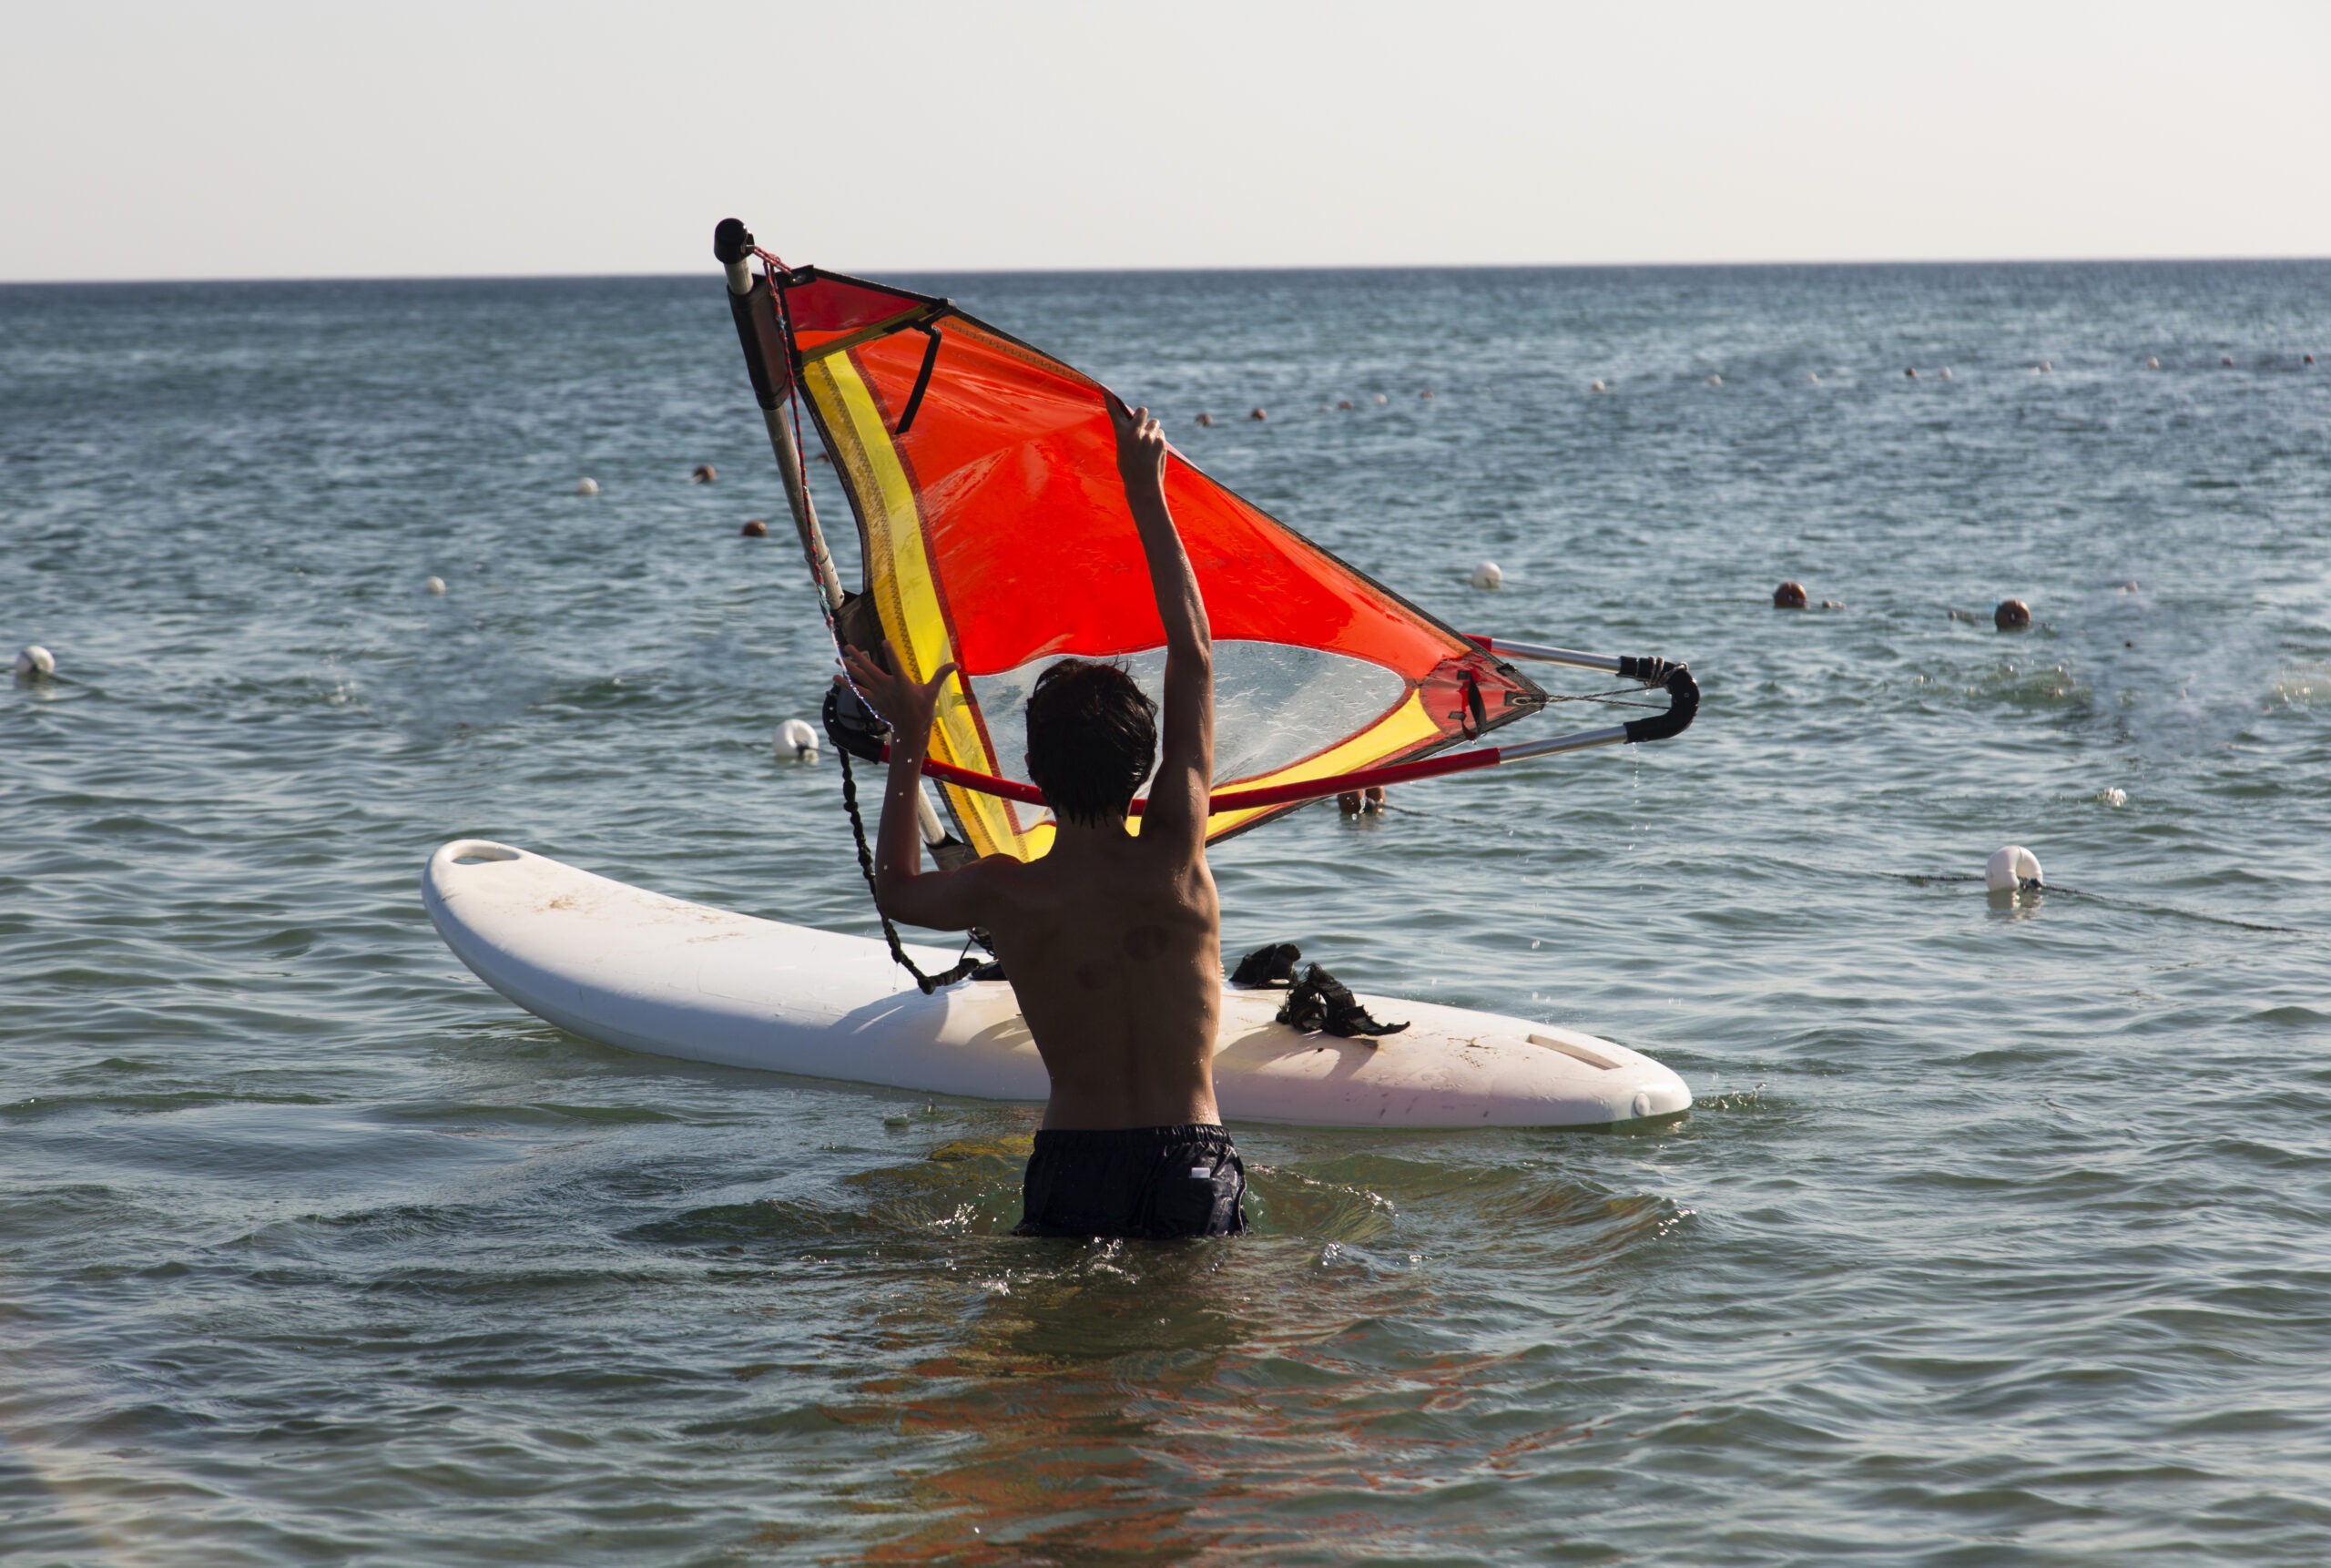 back-view-of-young-boy-surfer-in-the-sea-preparing-to-windsurf-on-a-sunny-summer-day